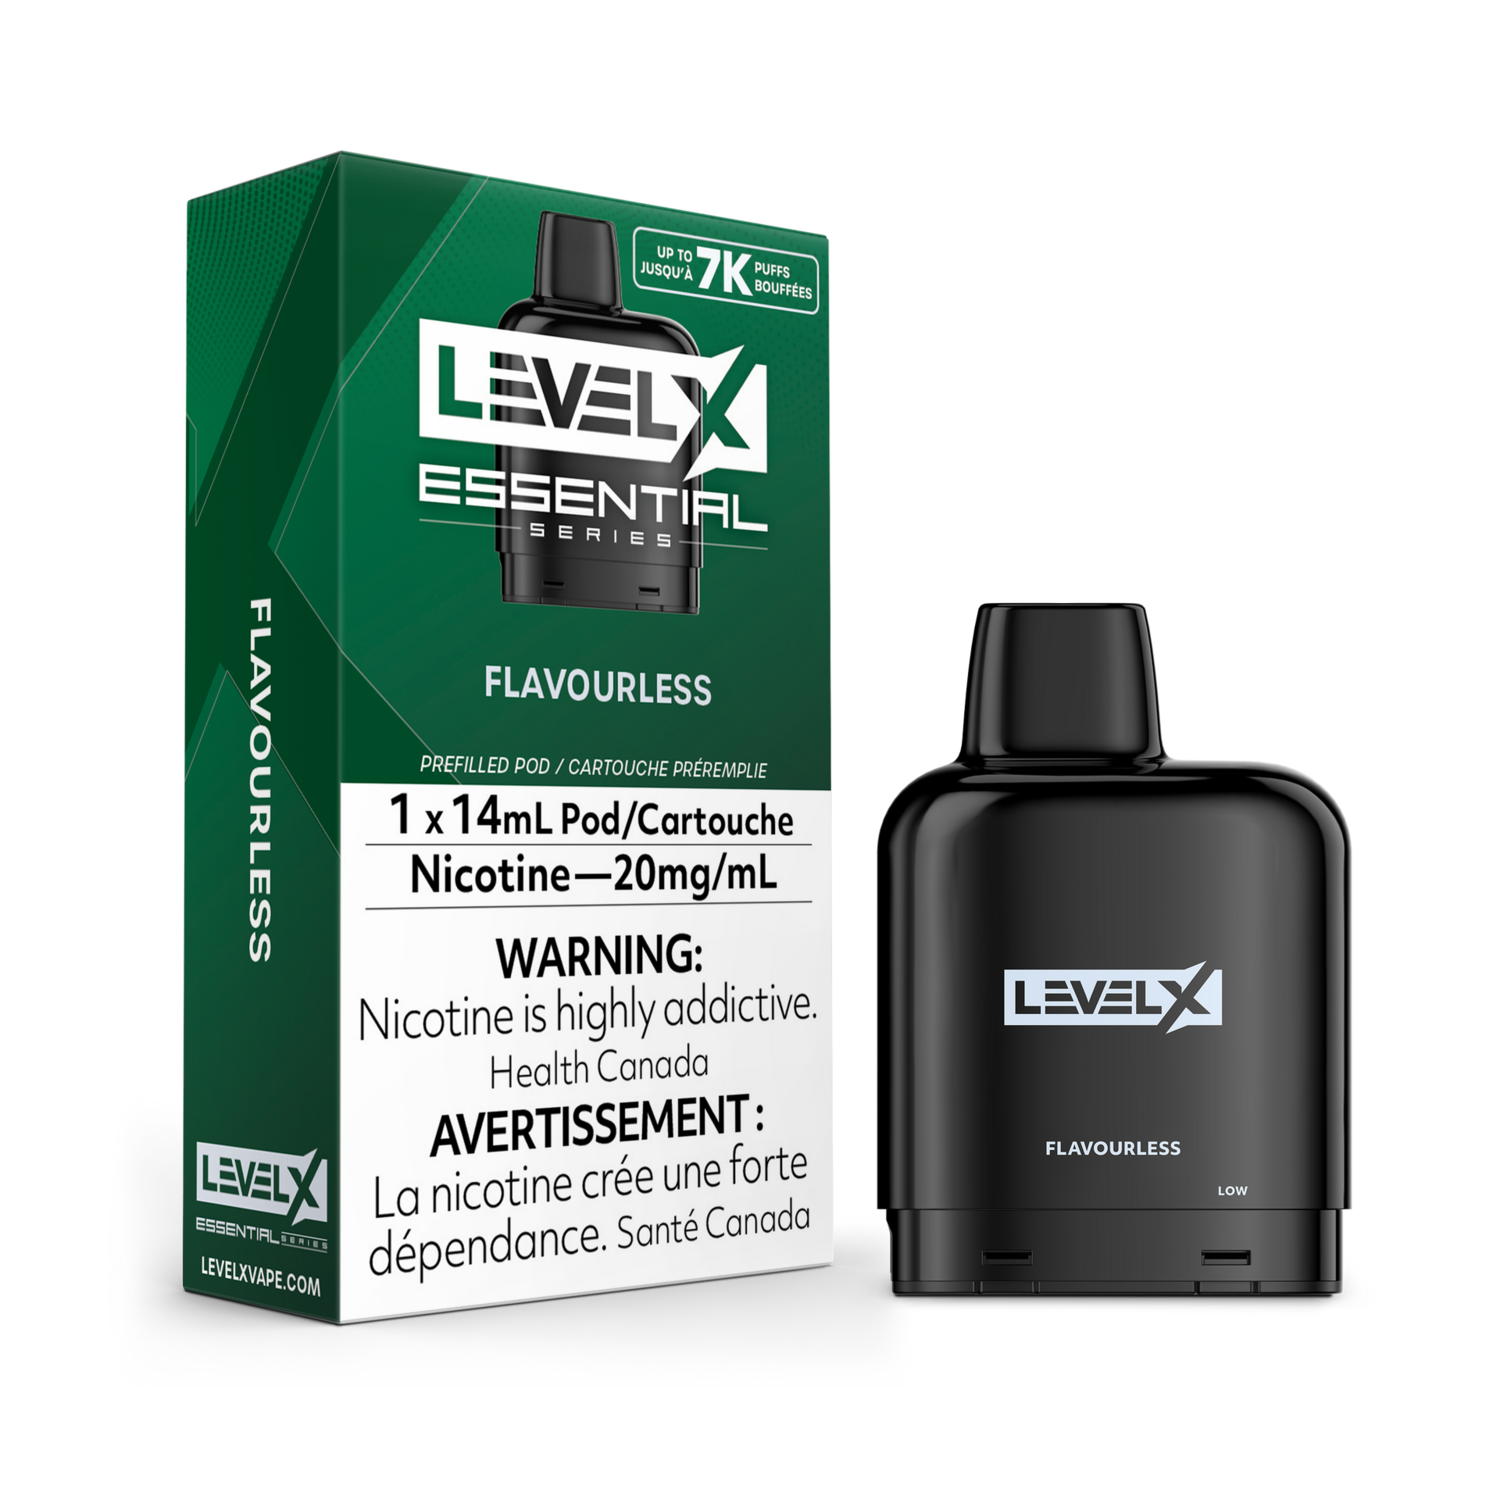 Flavourless Essential Series Level X Pod